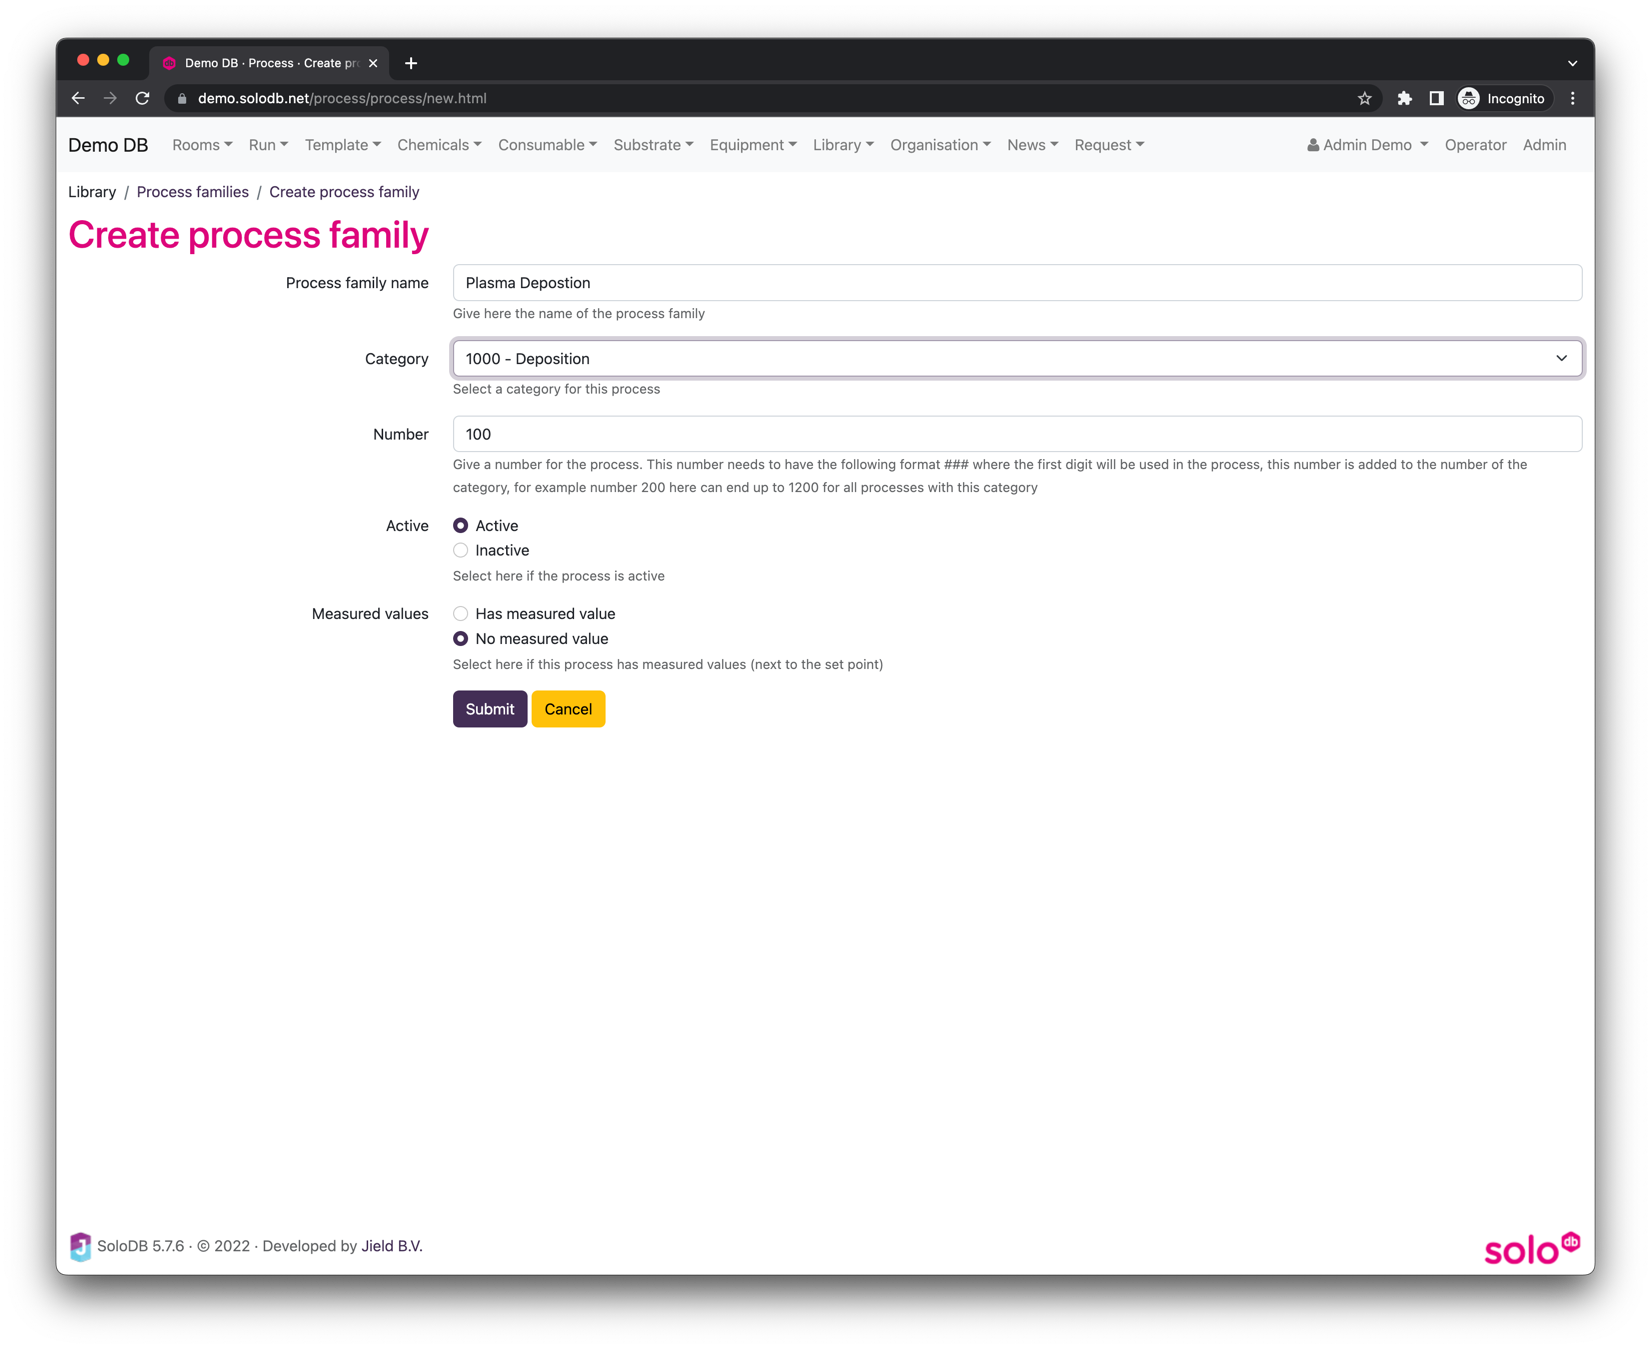 Image showing the form how to
create new process family